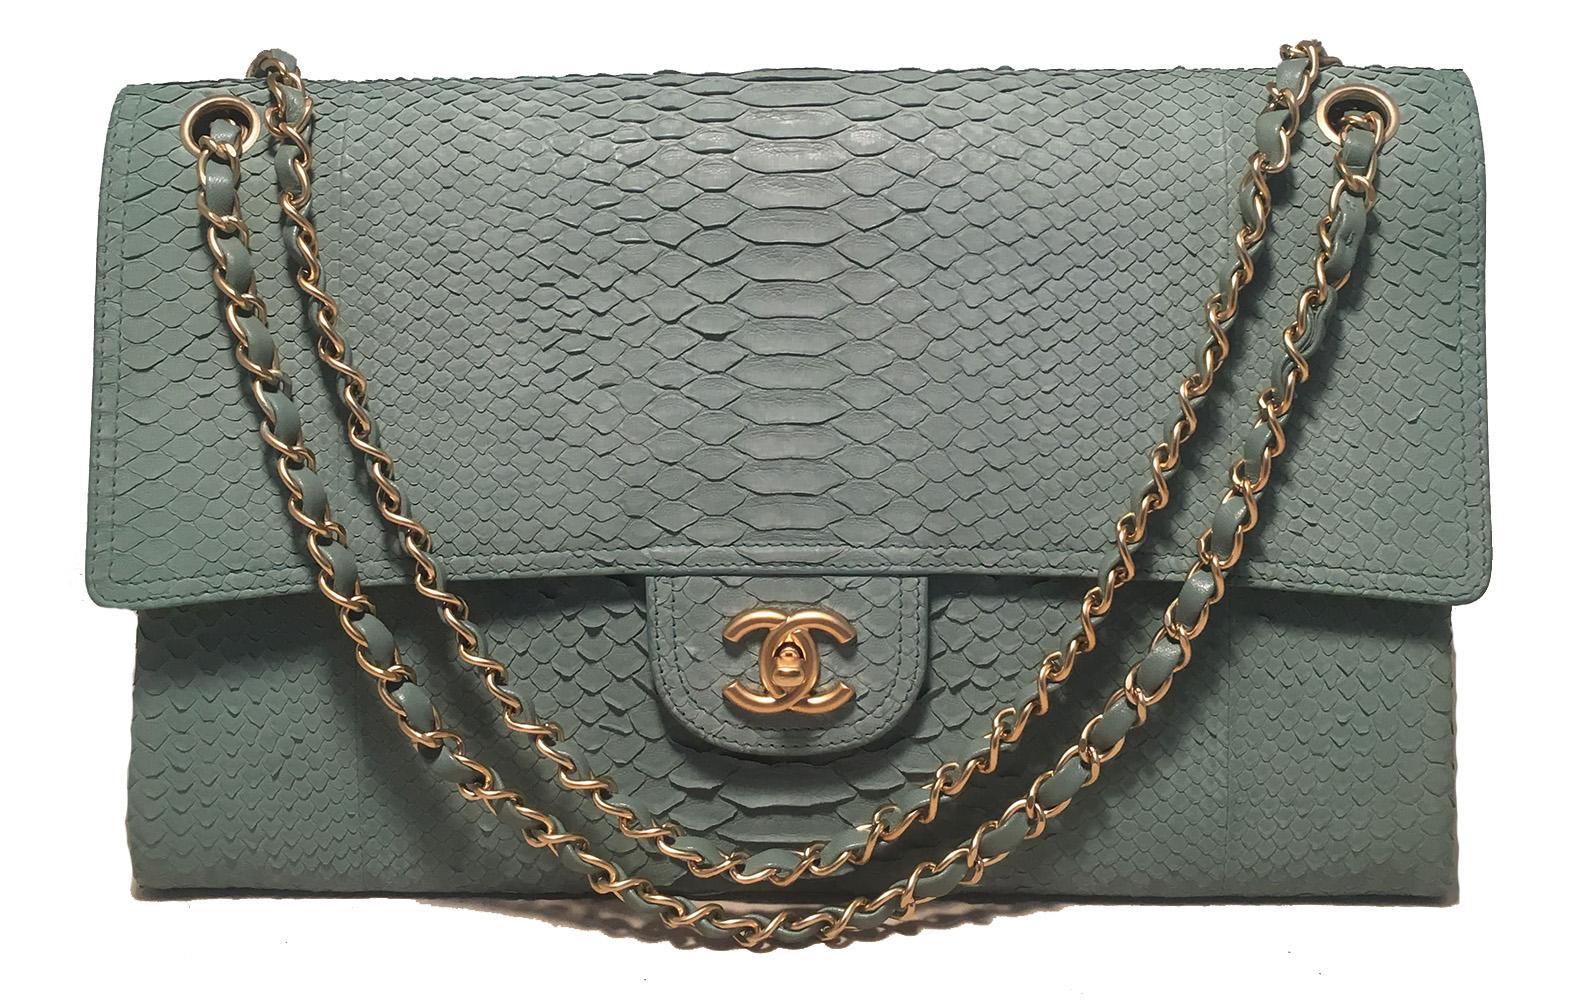 Chanel Seafoam Python Snakeskin Classic Flap in excellent condition. Pale sea foam green python snakeskin exterior trimmed with matte gold hardware. Woven chain and leather shoulder strap can be worn short or long to suit any style. Front CC logo